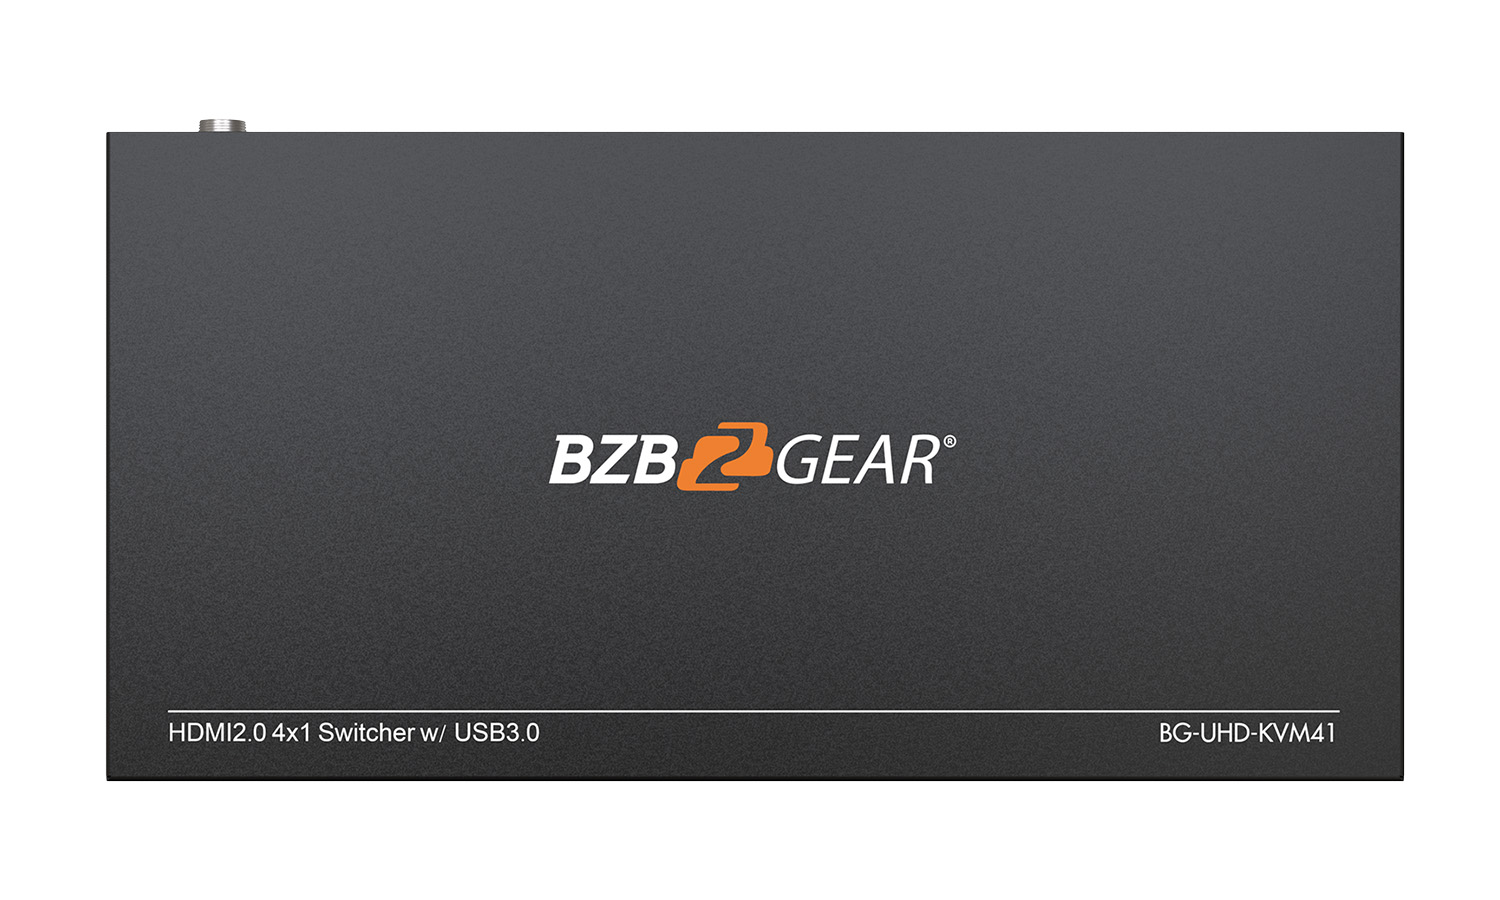 BZBGEAR BG-UHD-KVM41-KIT 4-Port 4K UHD KVM and Conference Room Switcher with HDMI and USB3.0 Kit with 4 Table Grommets